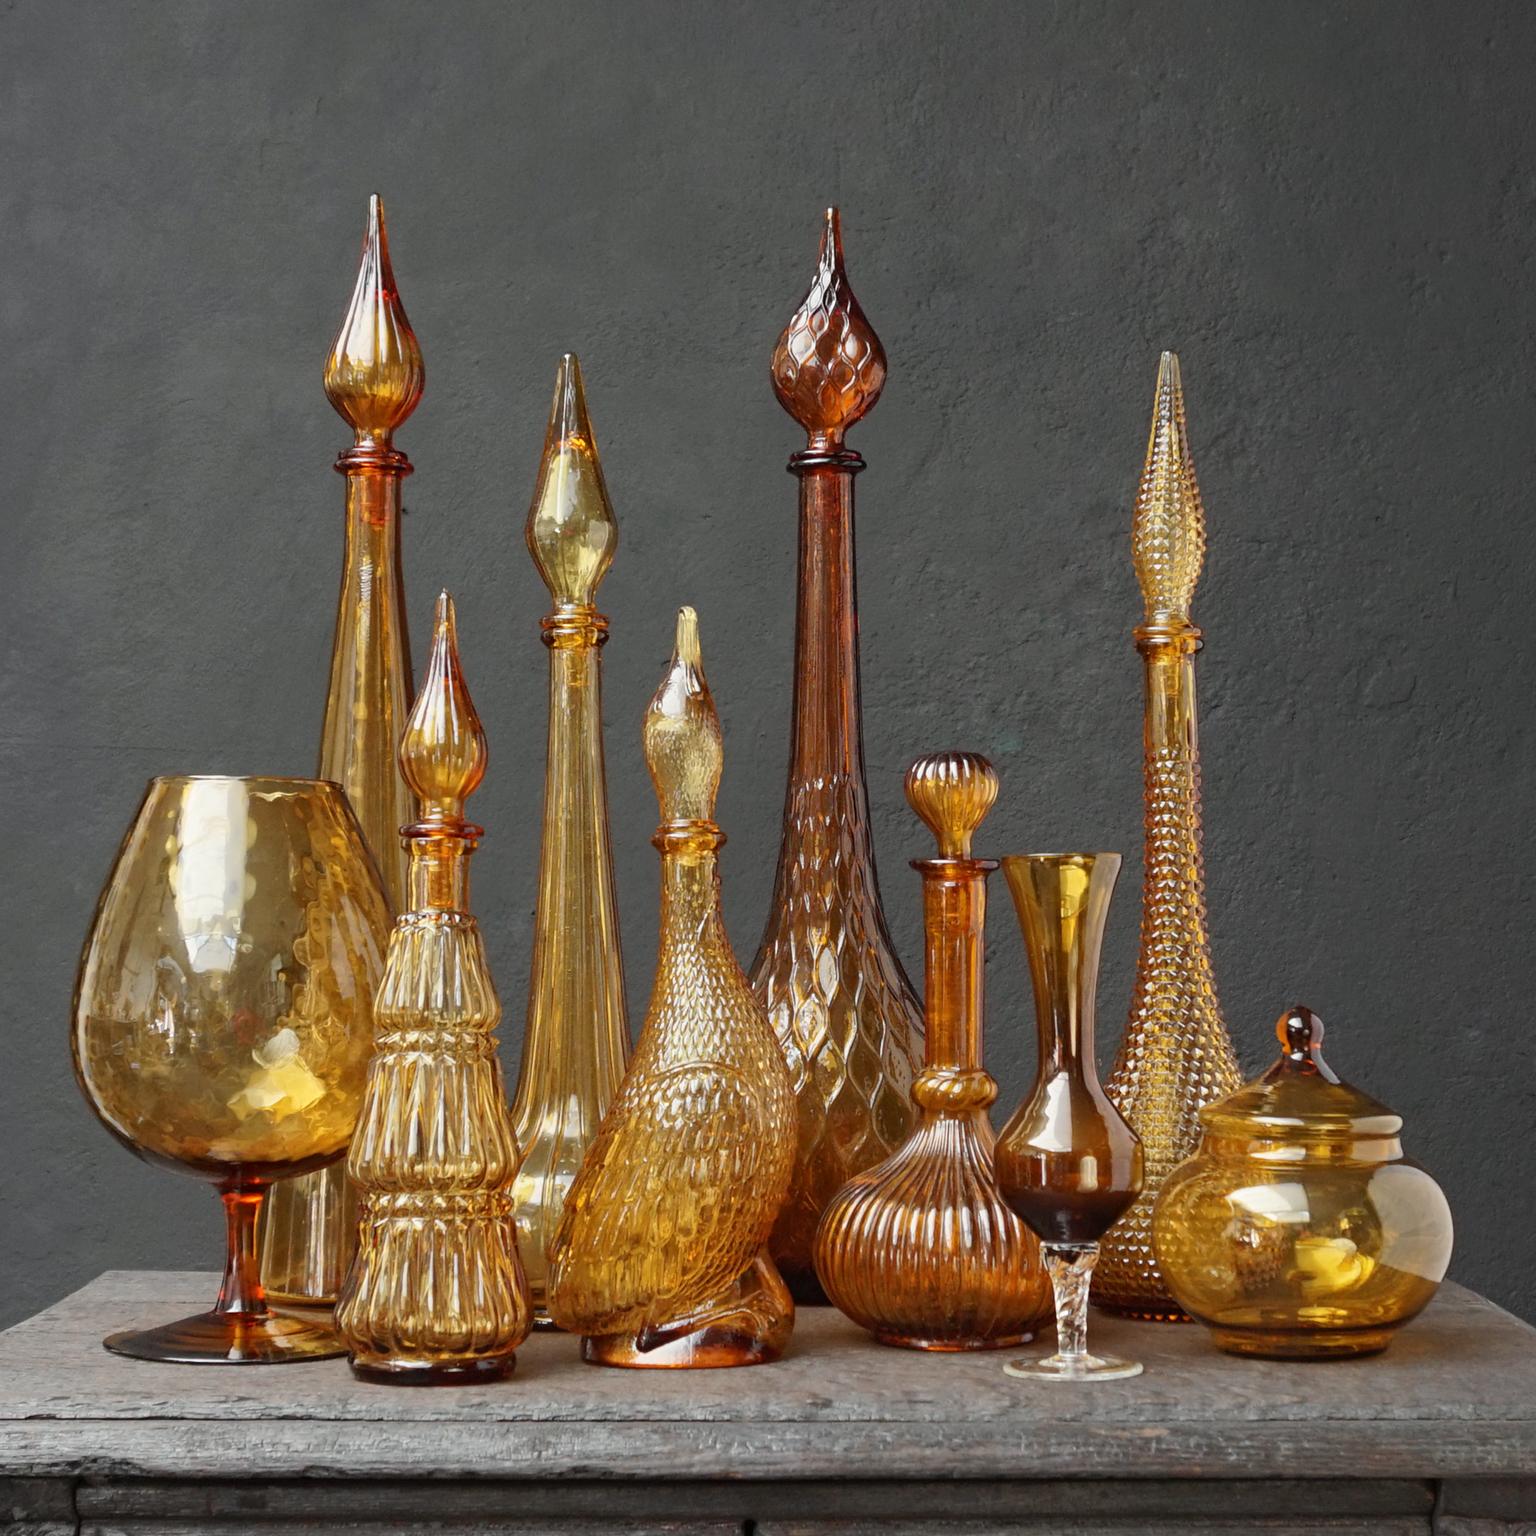 Very decorative amber brown yellow set of ten different size and colour Italian glass.
Seven pressed genie bottles and three blown clear glass items; a brownish yellow vase, a large cognac glass and a bonbon or candy jar.

Mention Italian glass and